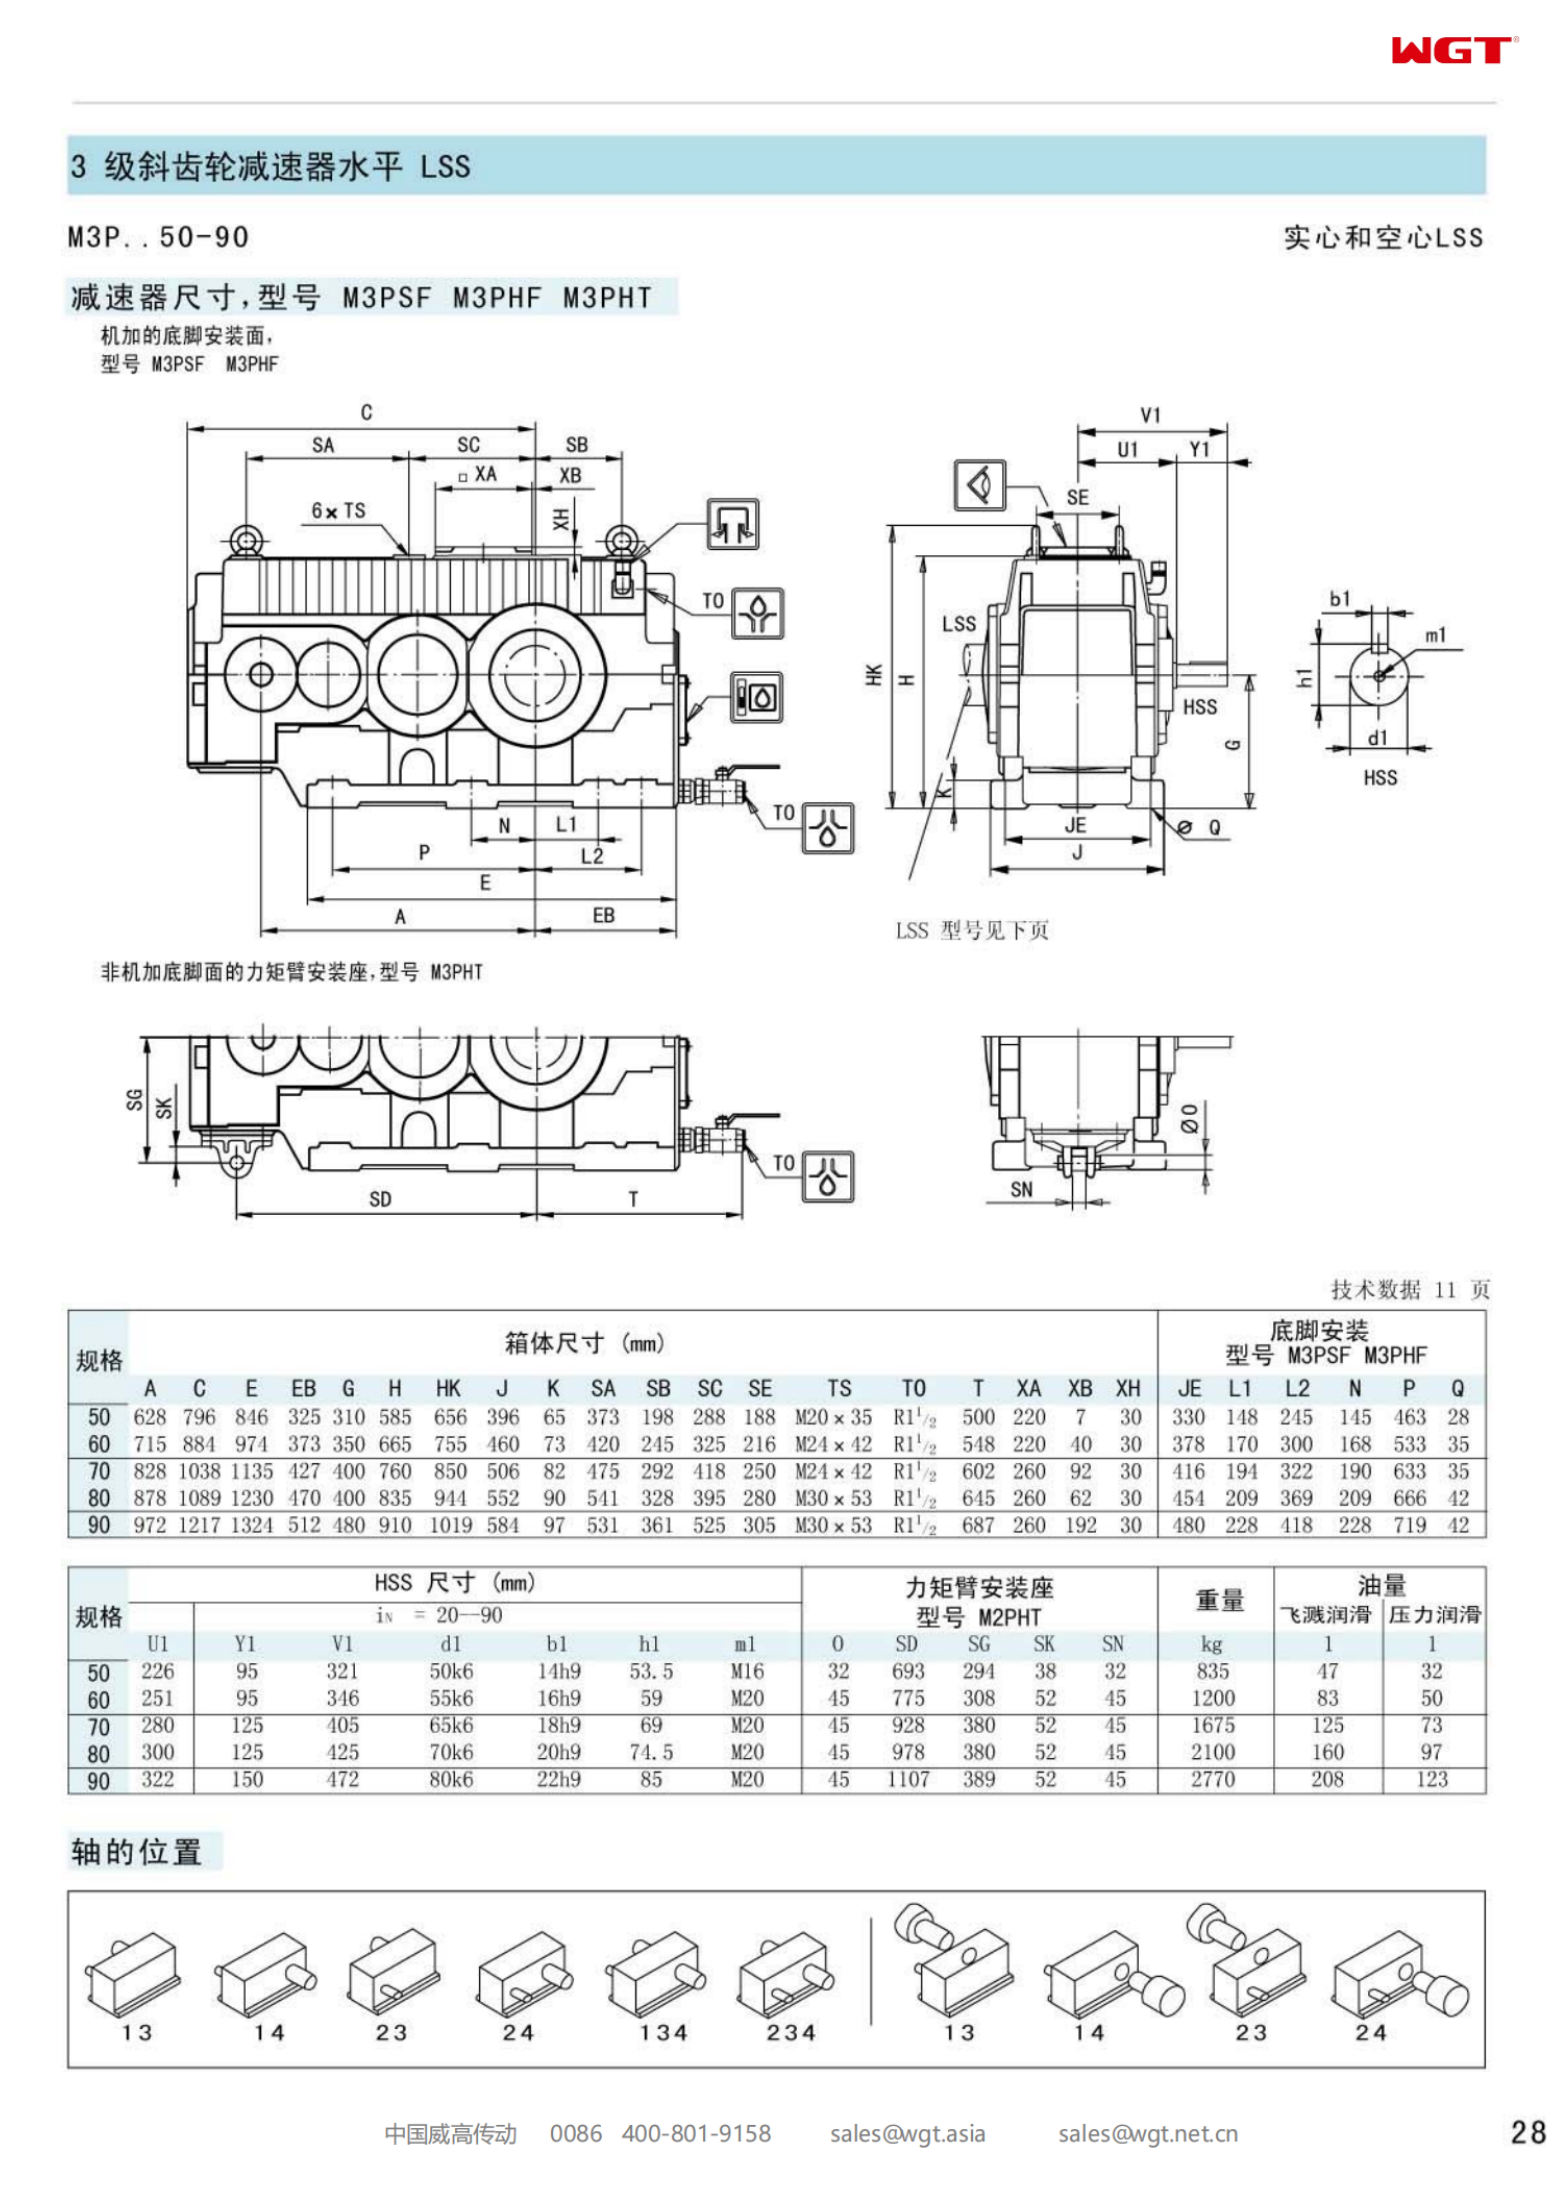 M3PSF50 Replace_SEW_M_Series Gearbox